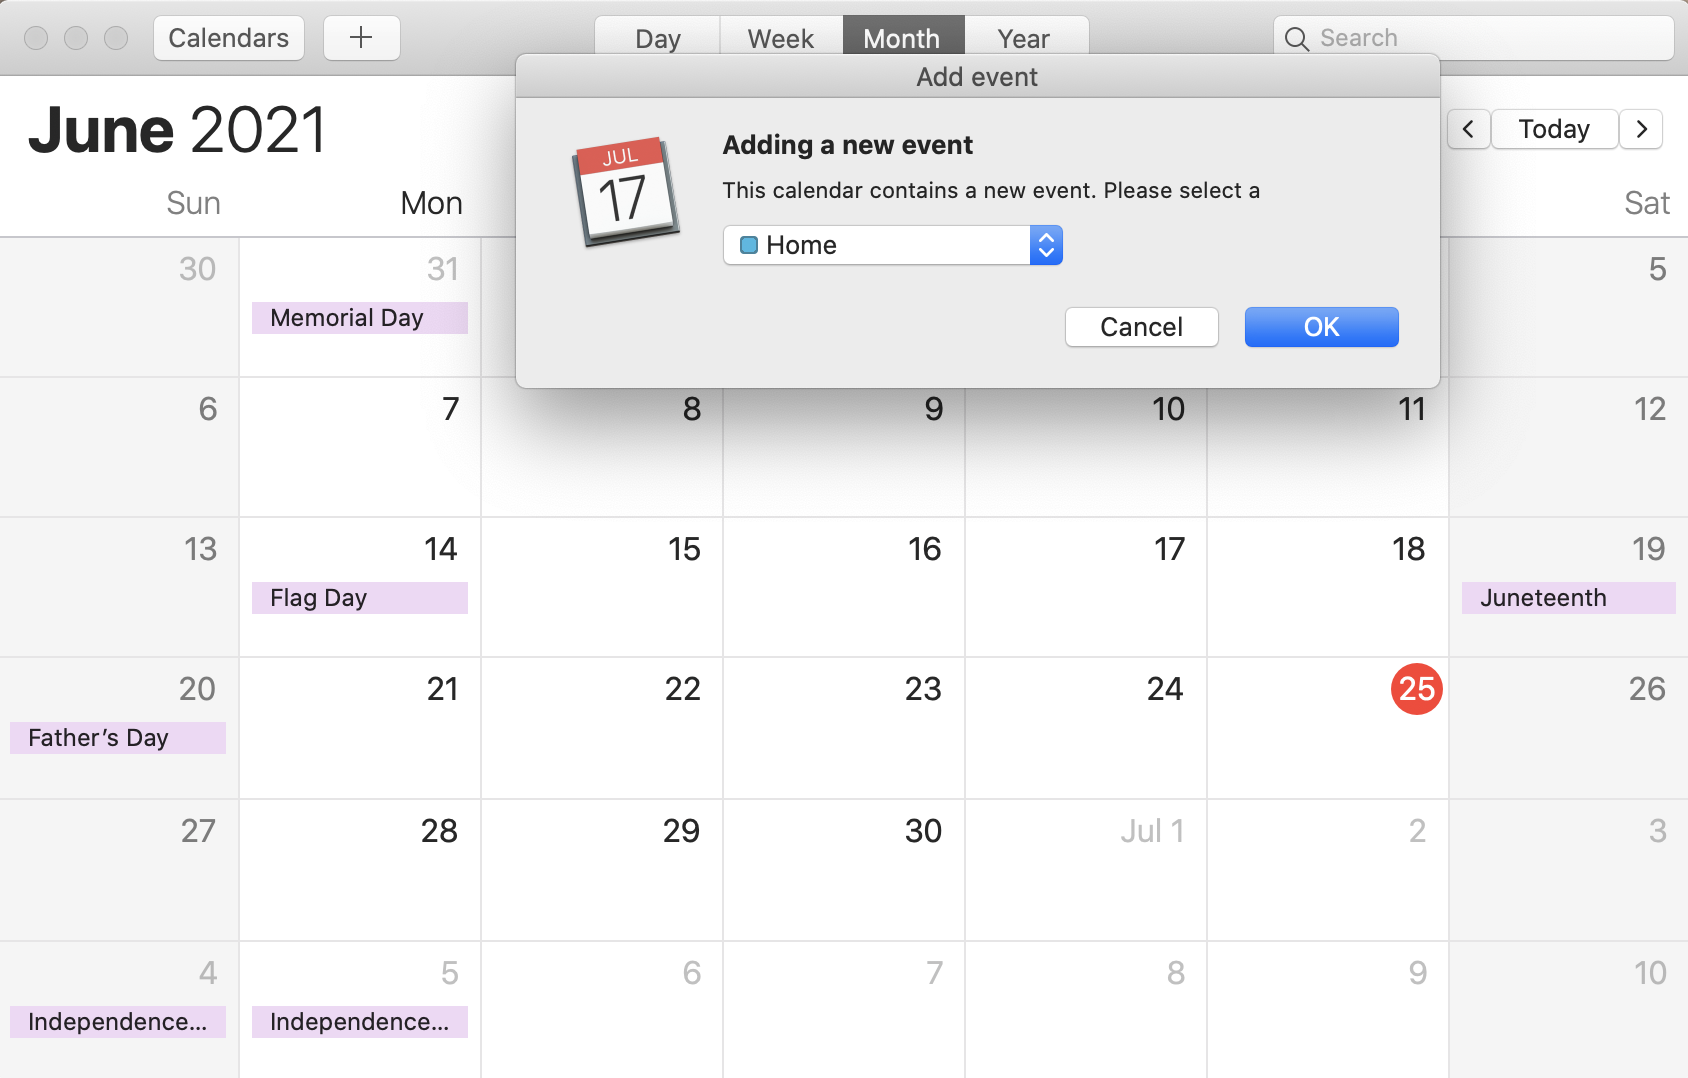 iCal calendar with a dialog for adding a new event, which prompts the user to select a calendar and confirm.